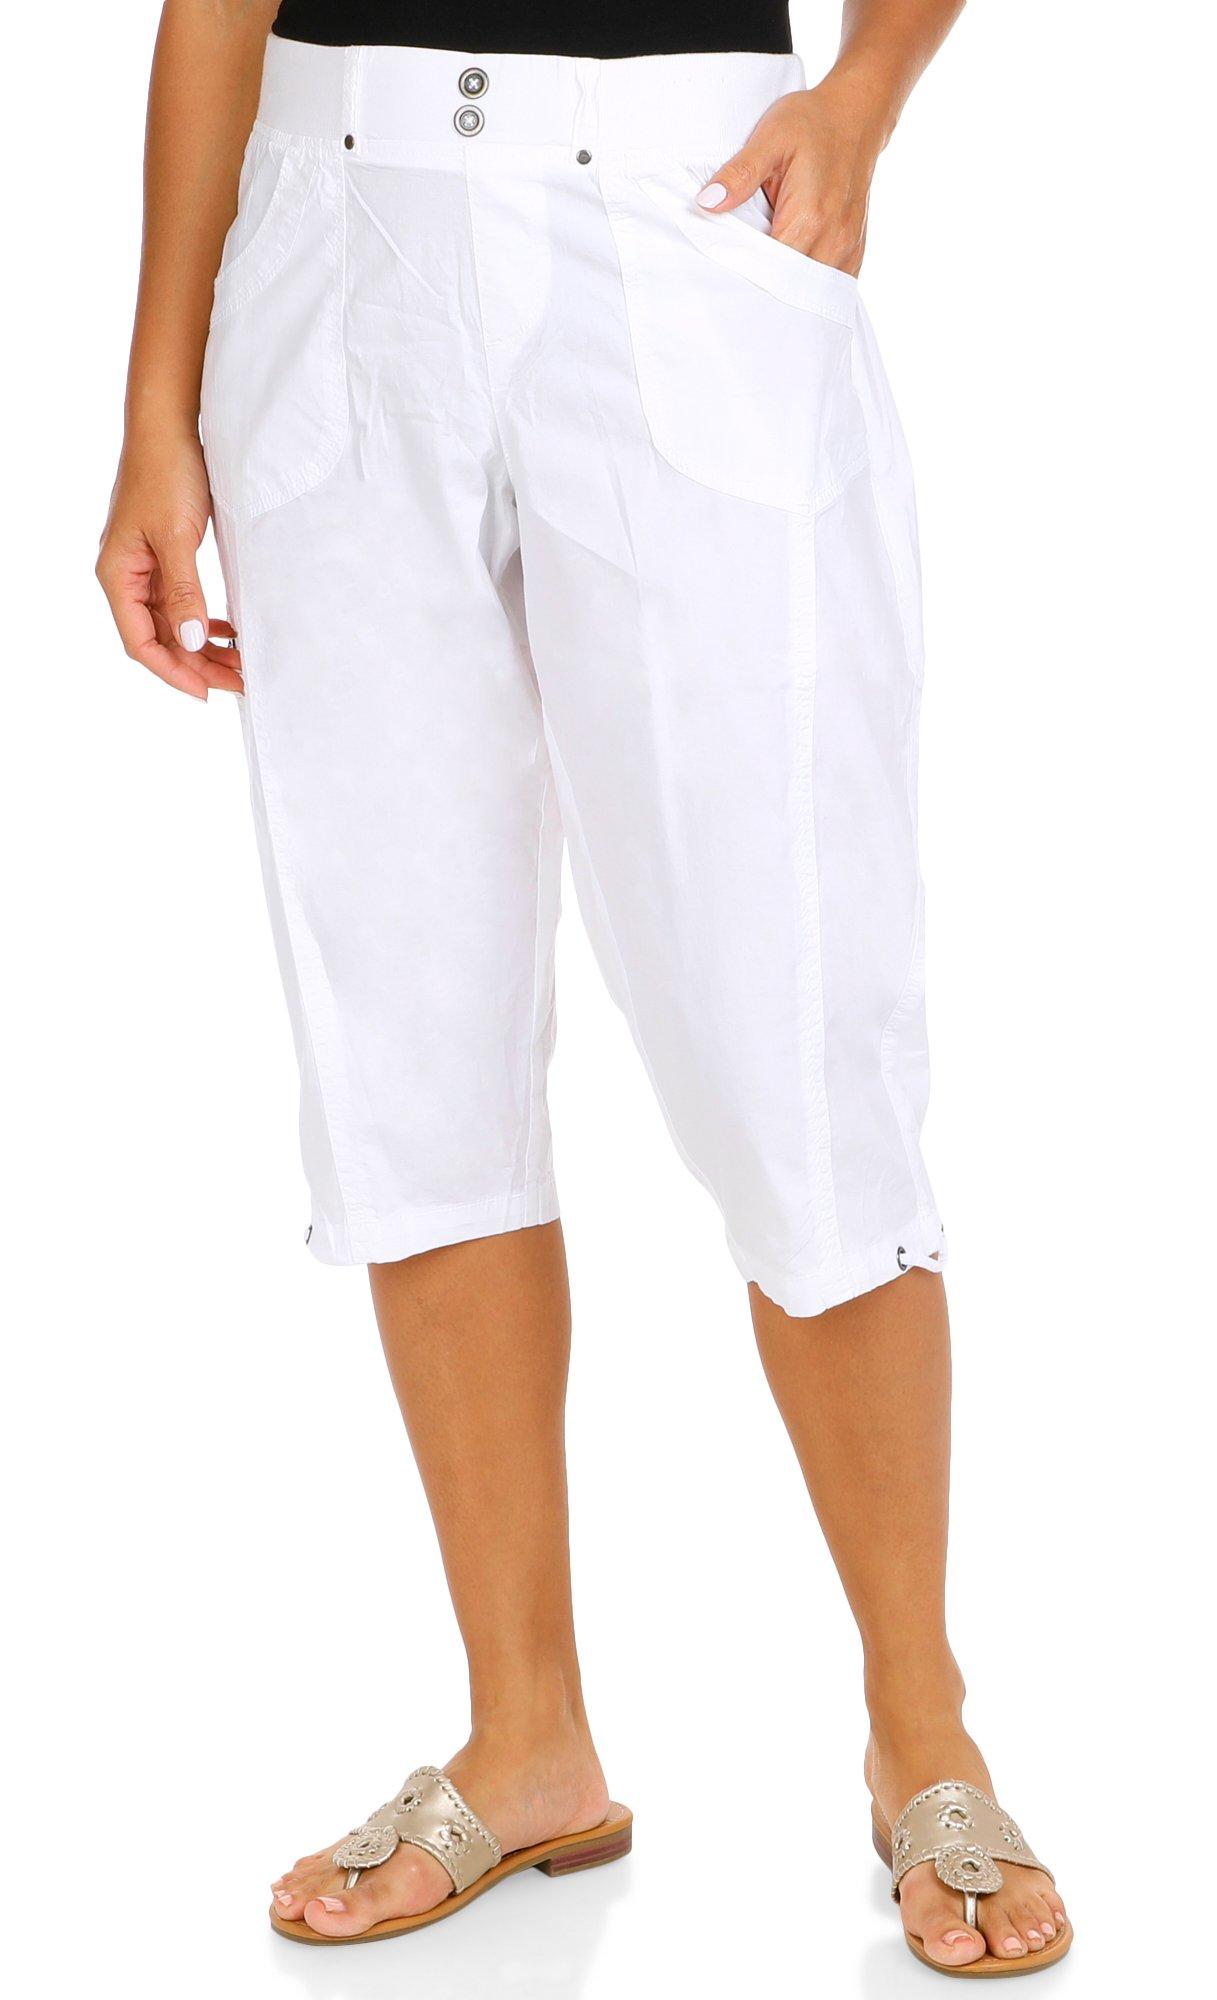 Sale on 400+ Capri Pants offers and gifts